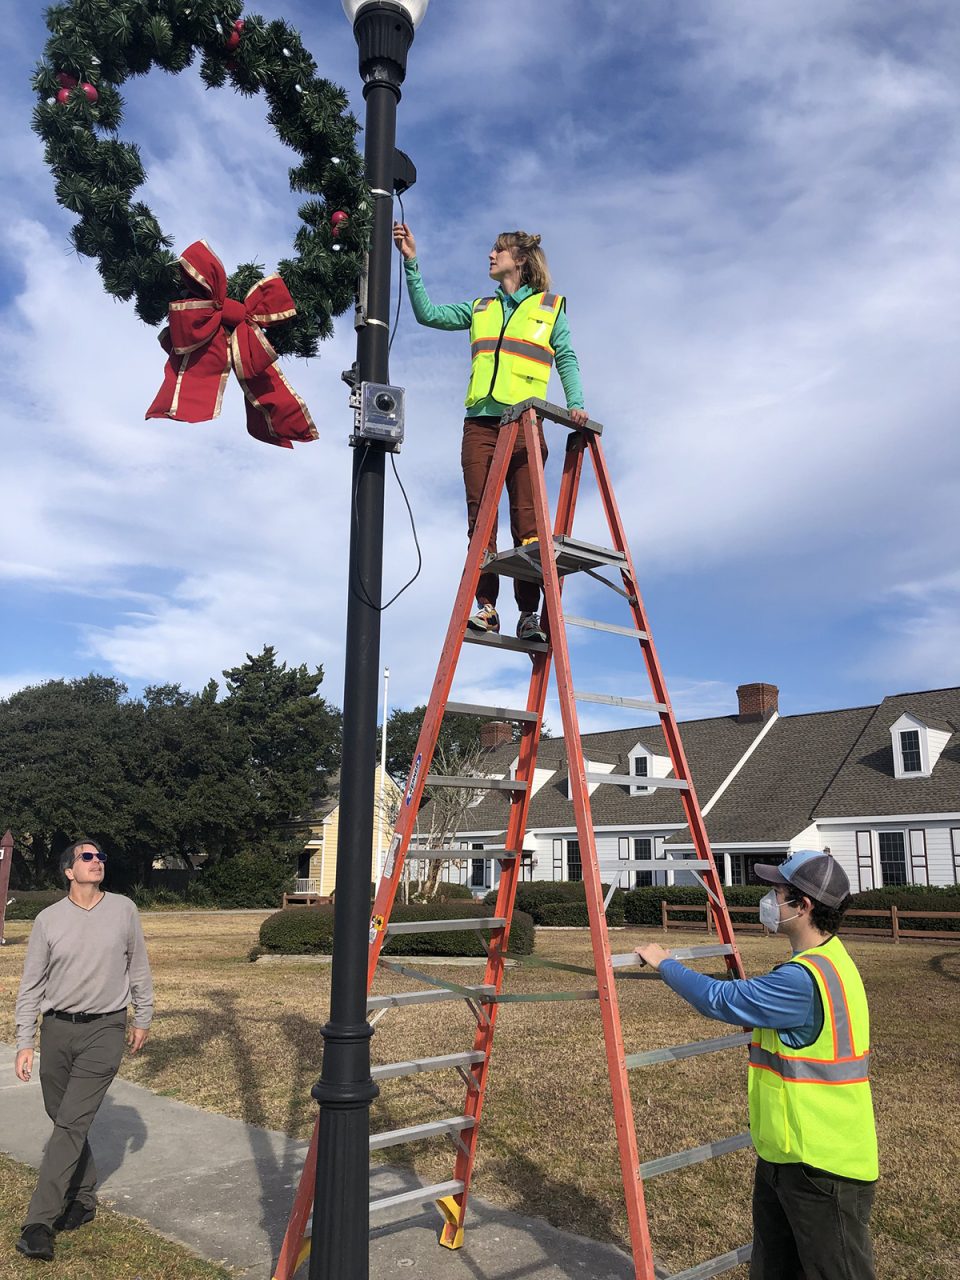 Researchers, from left, Tony Whipple, Dr. Katherine Anarde and Dr. Adam Gold set up pole-mounted sensing equipment in Beaufort in December 2021. Photo: Kerry Irish/UNC